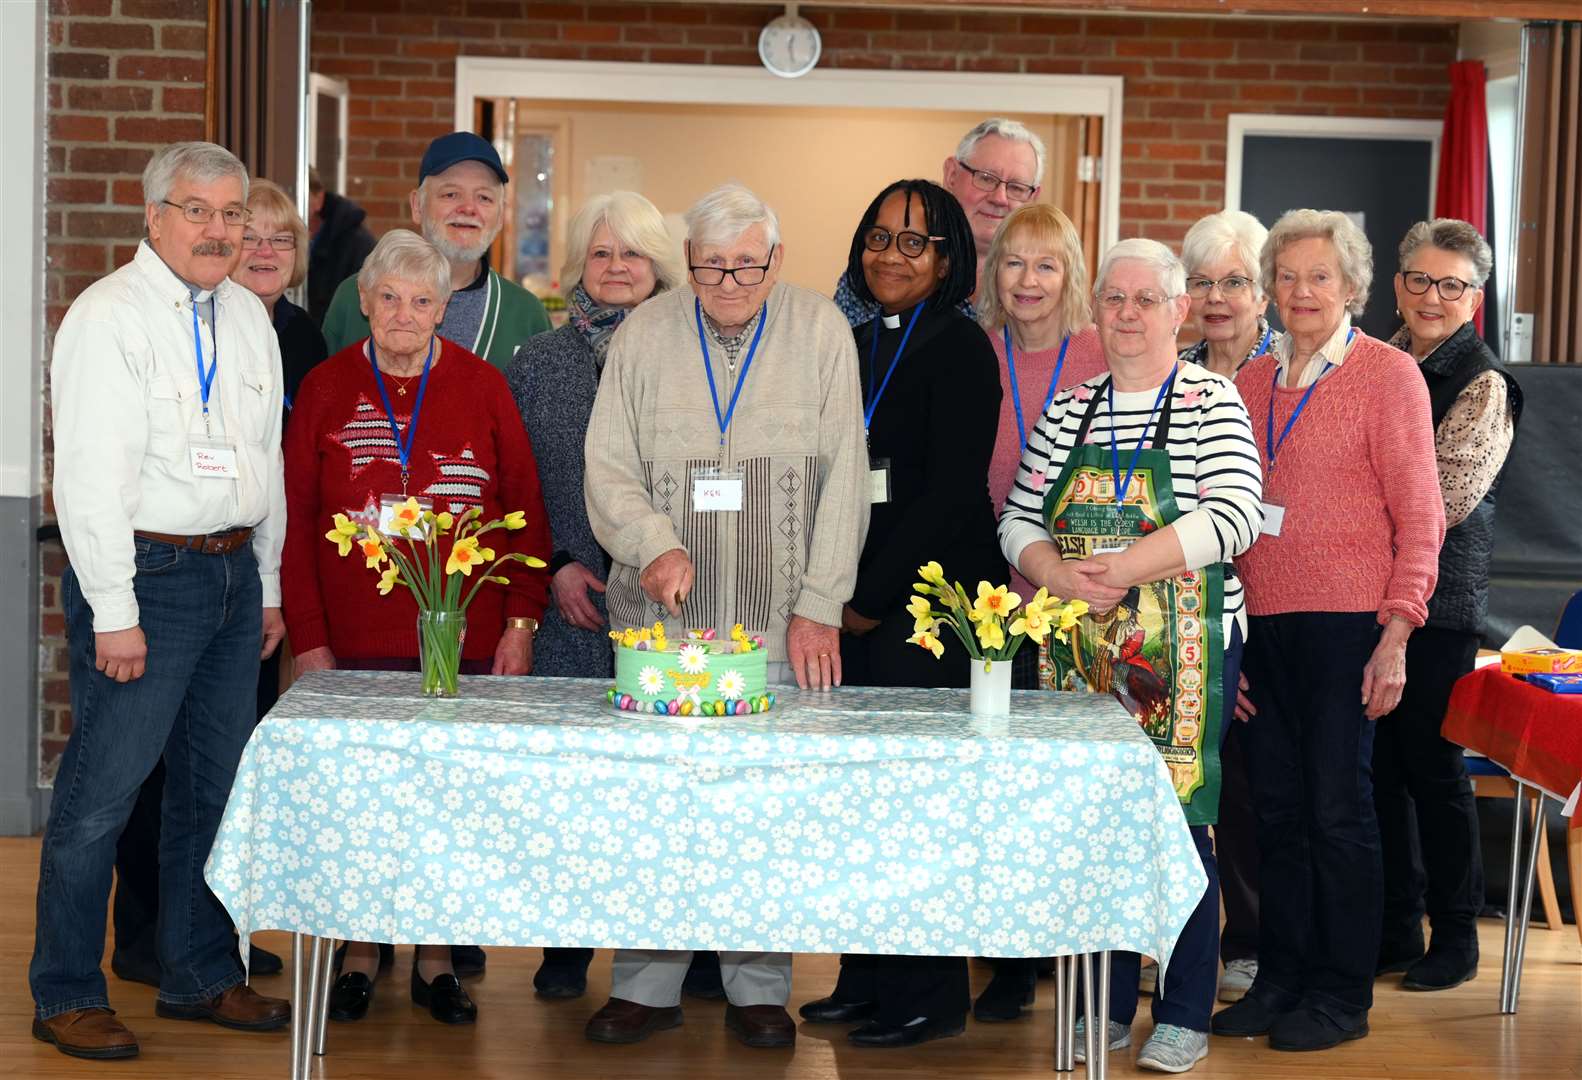 Forget-me-knot lunch club at Gaywood Church Rooms celebrating 56th birthday. The cake being cut by Ken Robinson. (63273668)